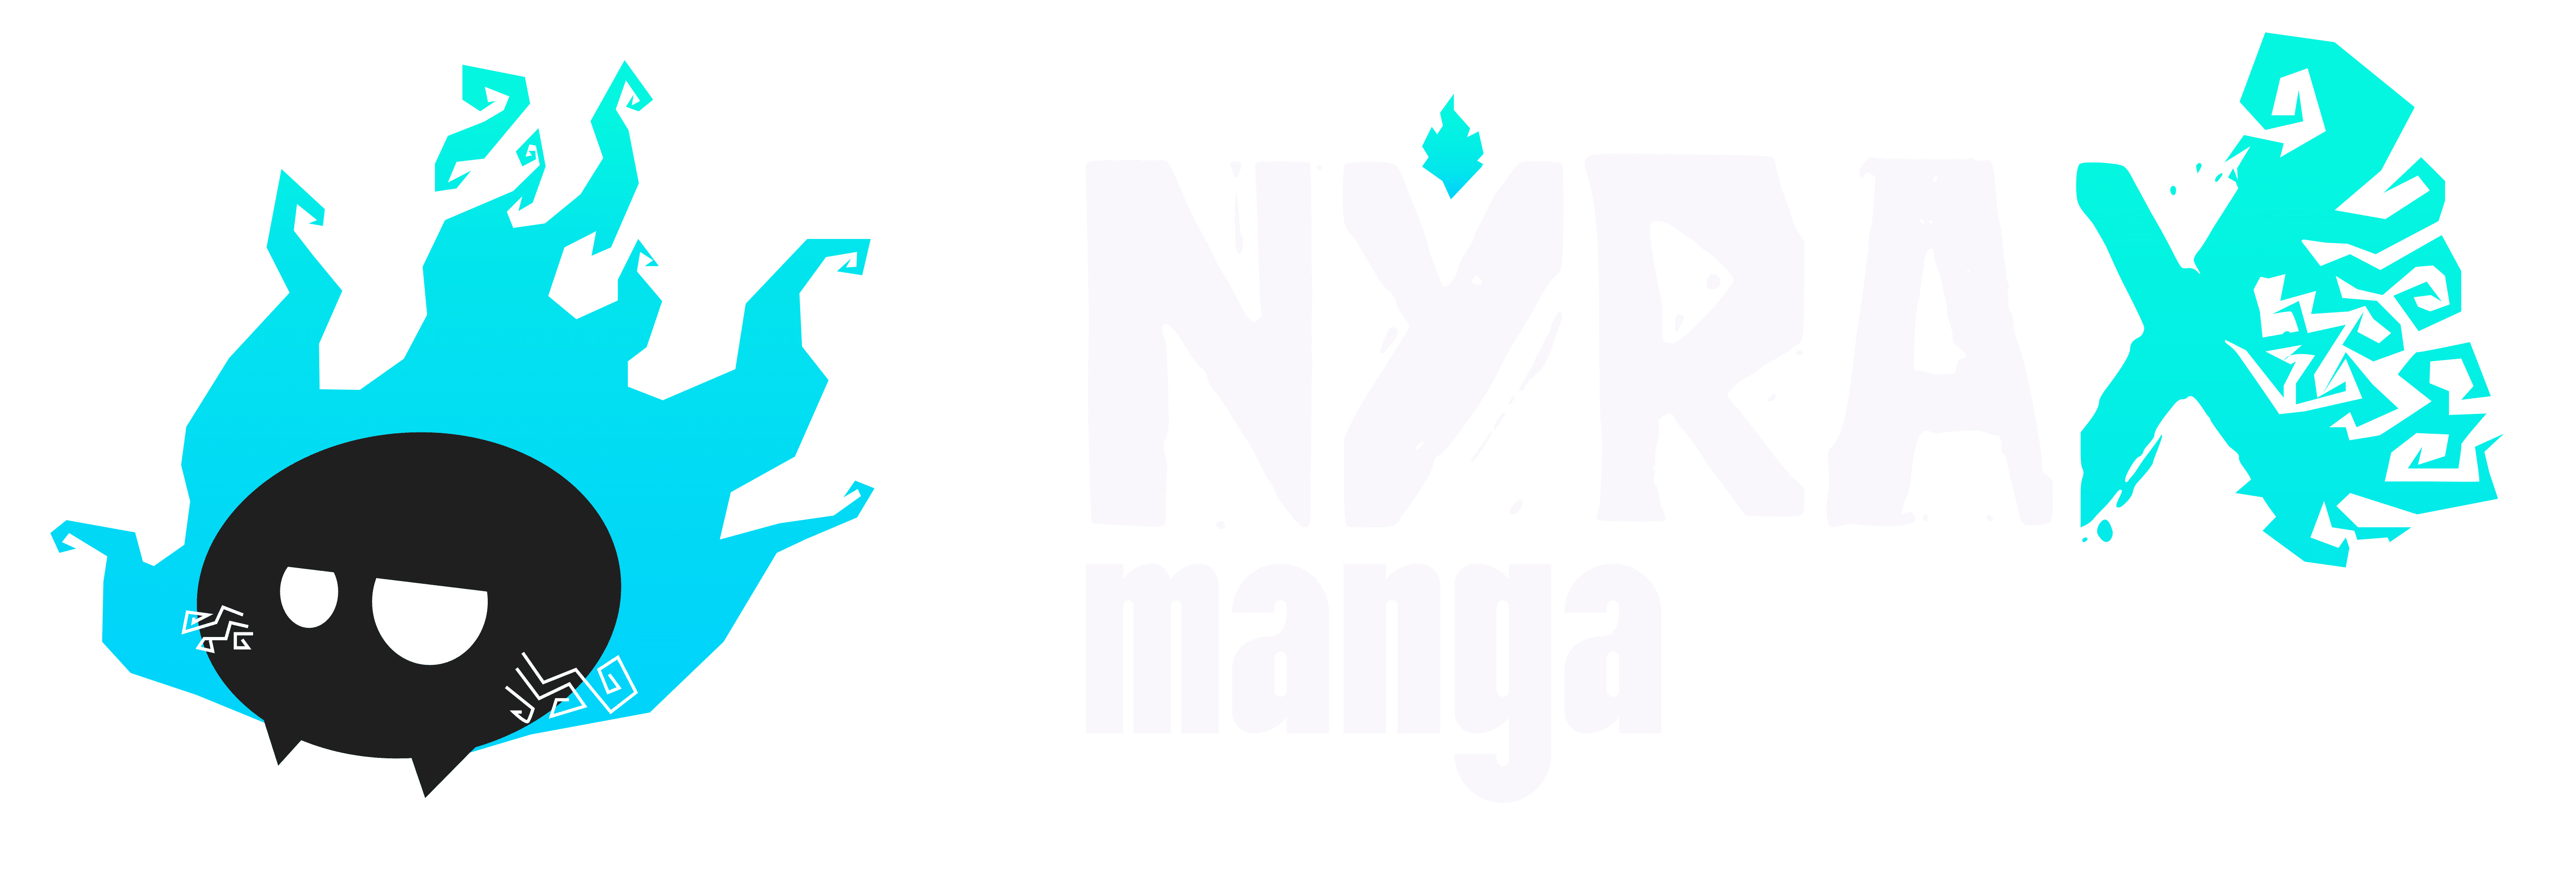 NYRAXMANGA | Read Latest Manga, Manhua & Manhwa in English - Read Manga, Manhwa and Manhua Online For Free, With Fastest Releases and Highest Quality in English